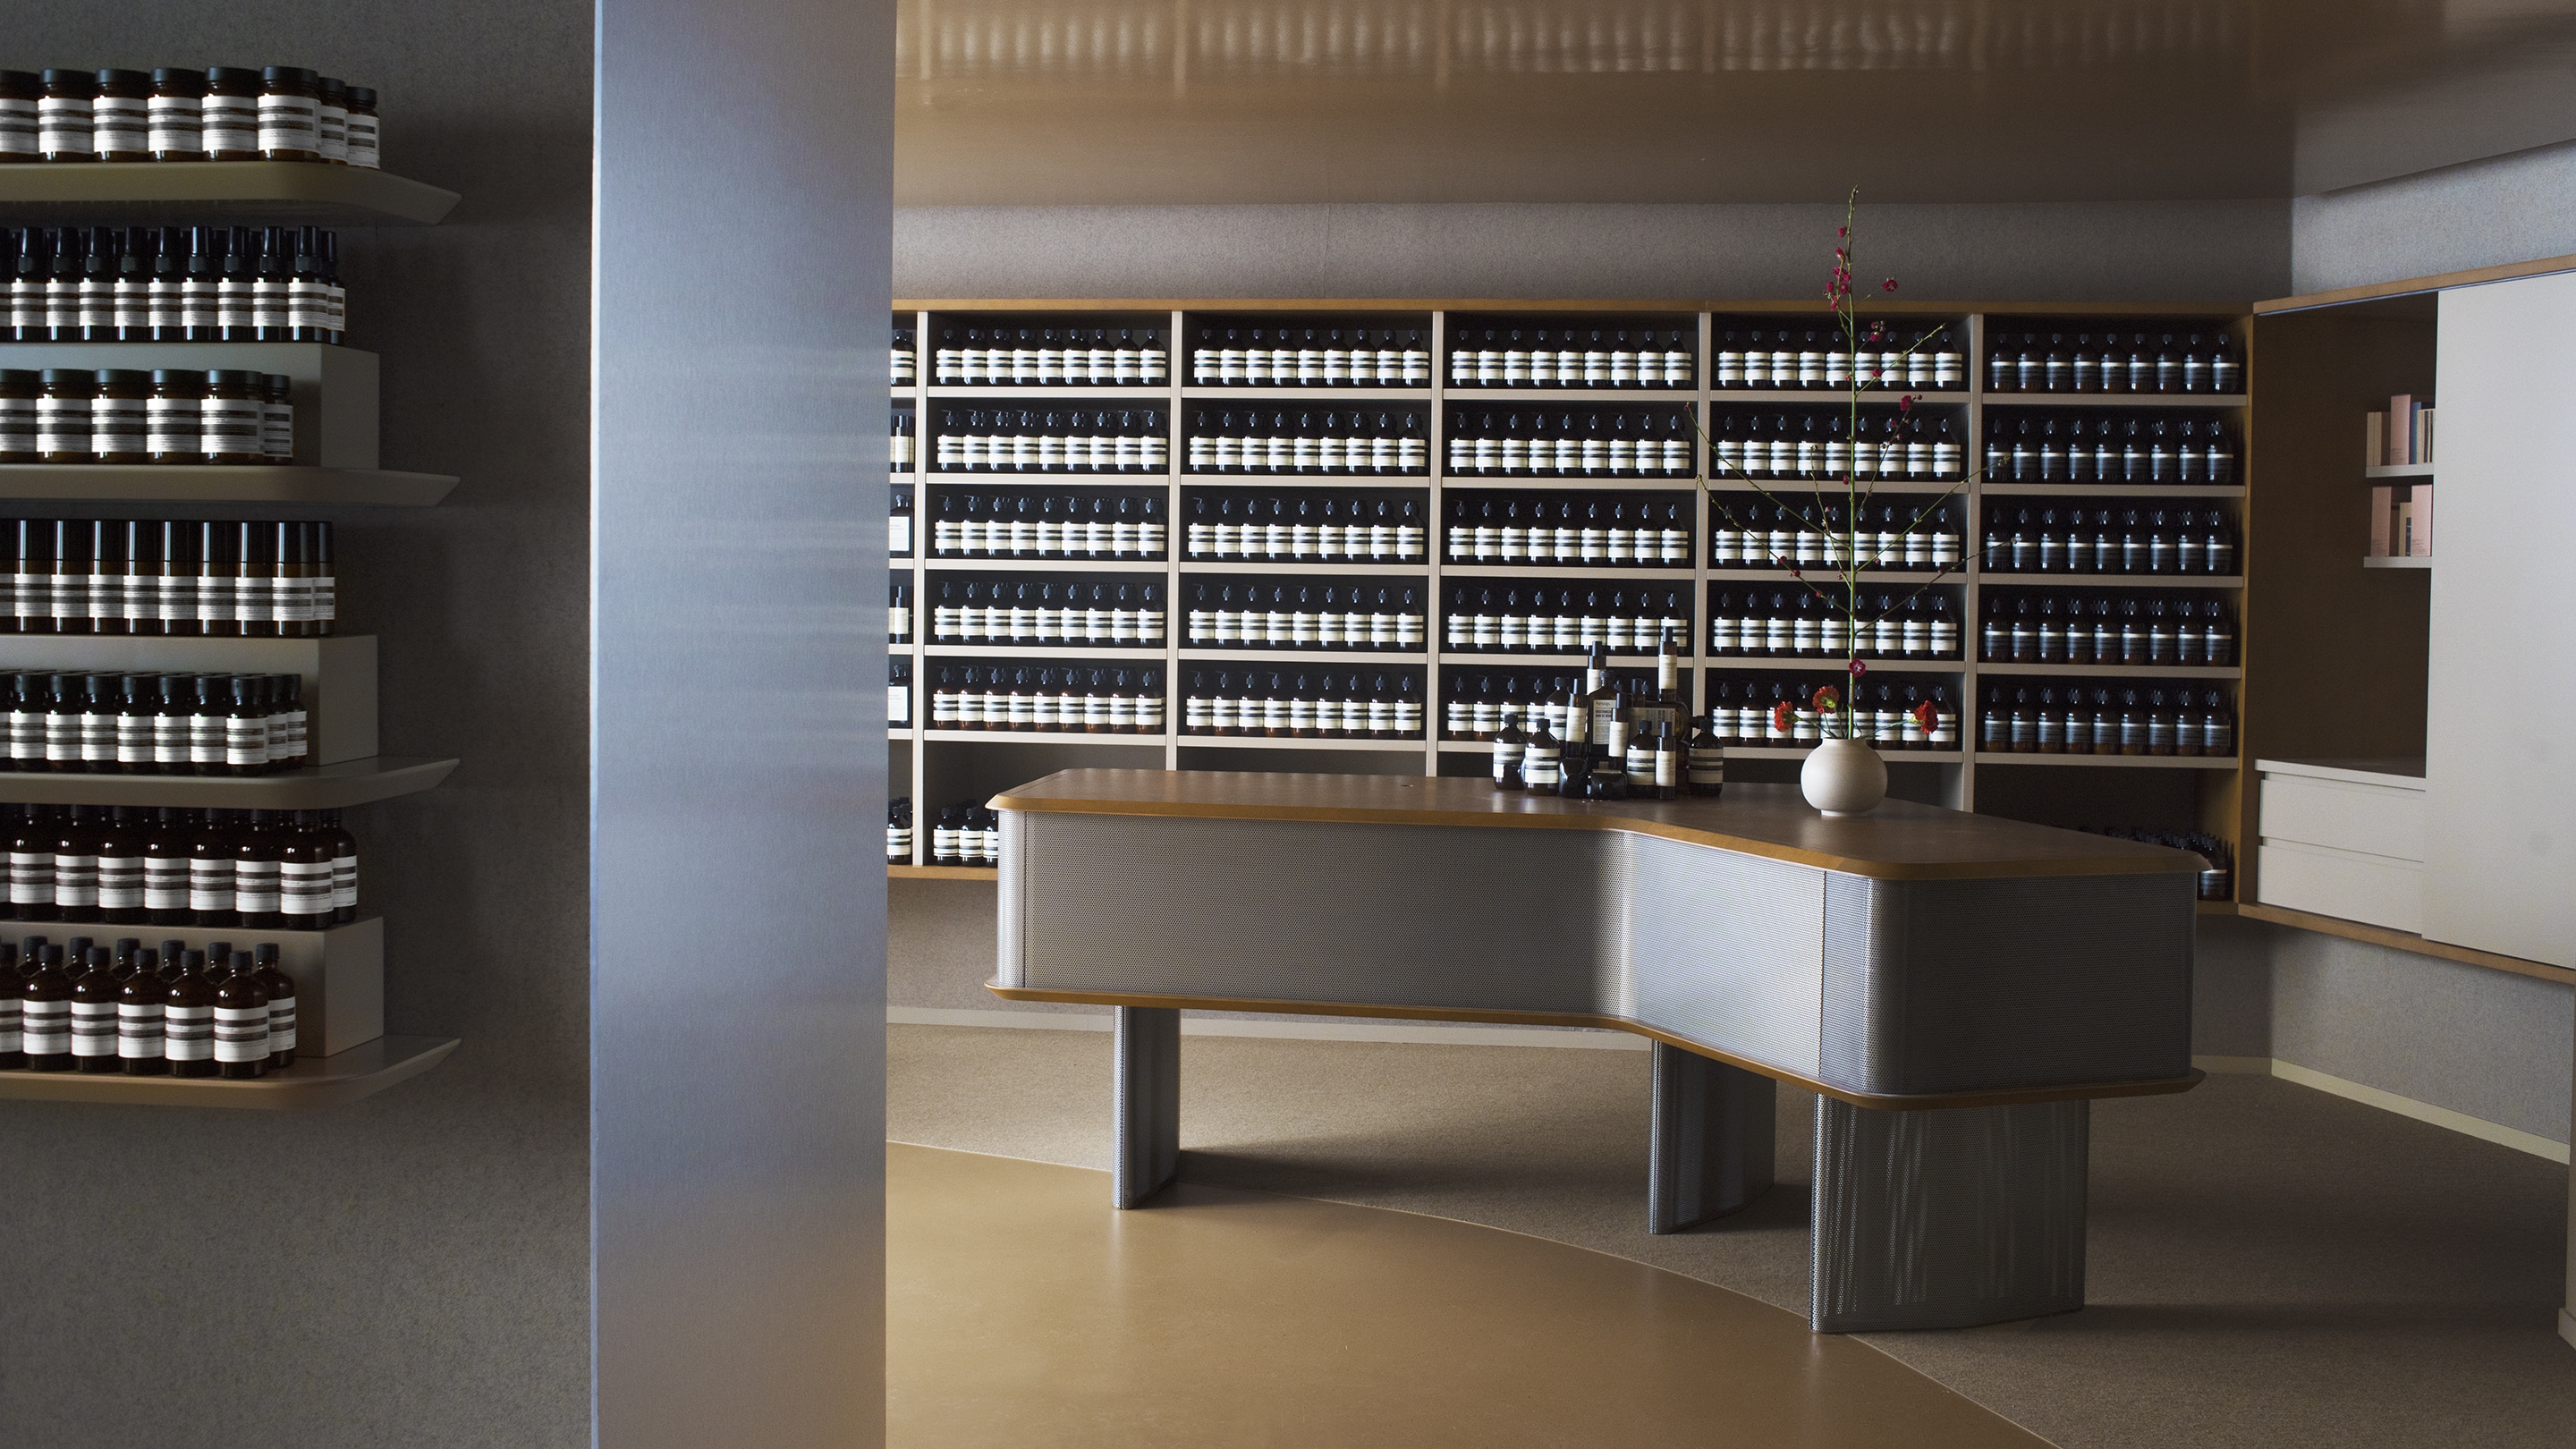 Aesop Rue Vieille du Temple store interior with shelving display